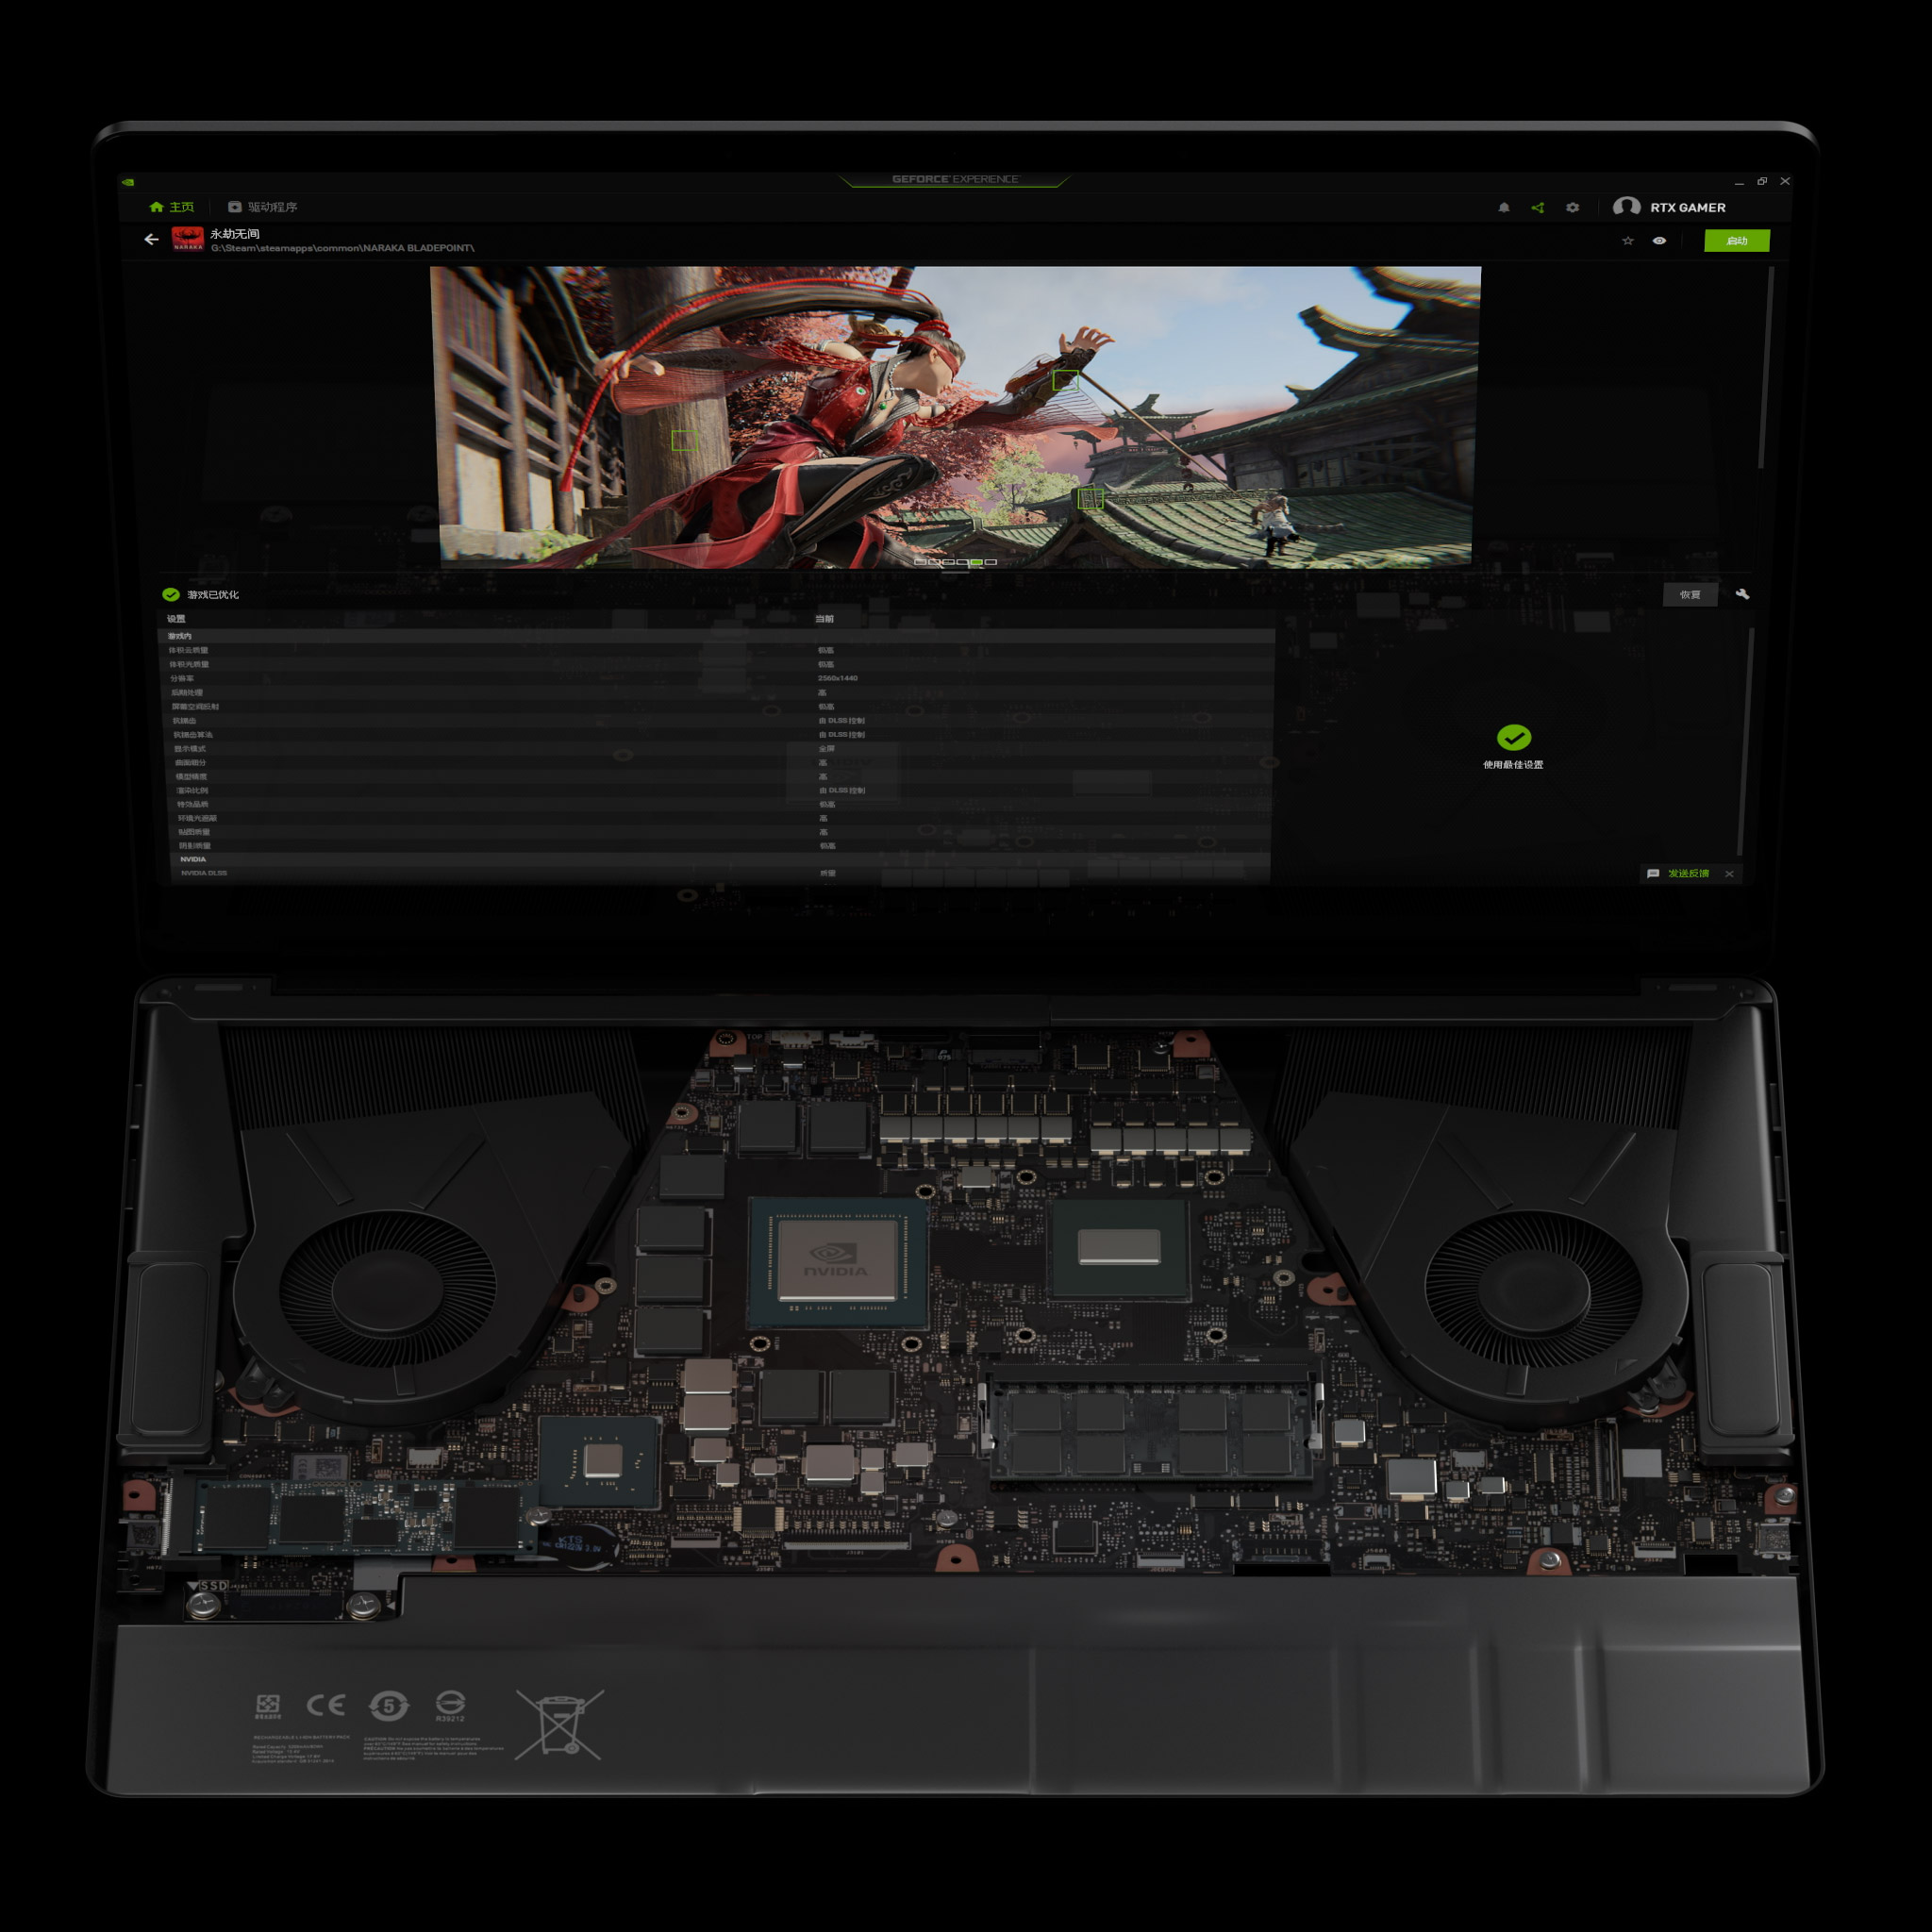 GeForce Laptop with Max-Q optimal playable settings in GeForce Experience for Red Dead Redemption 2